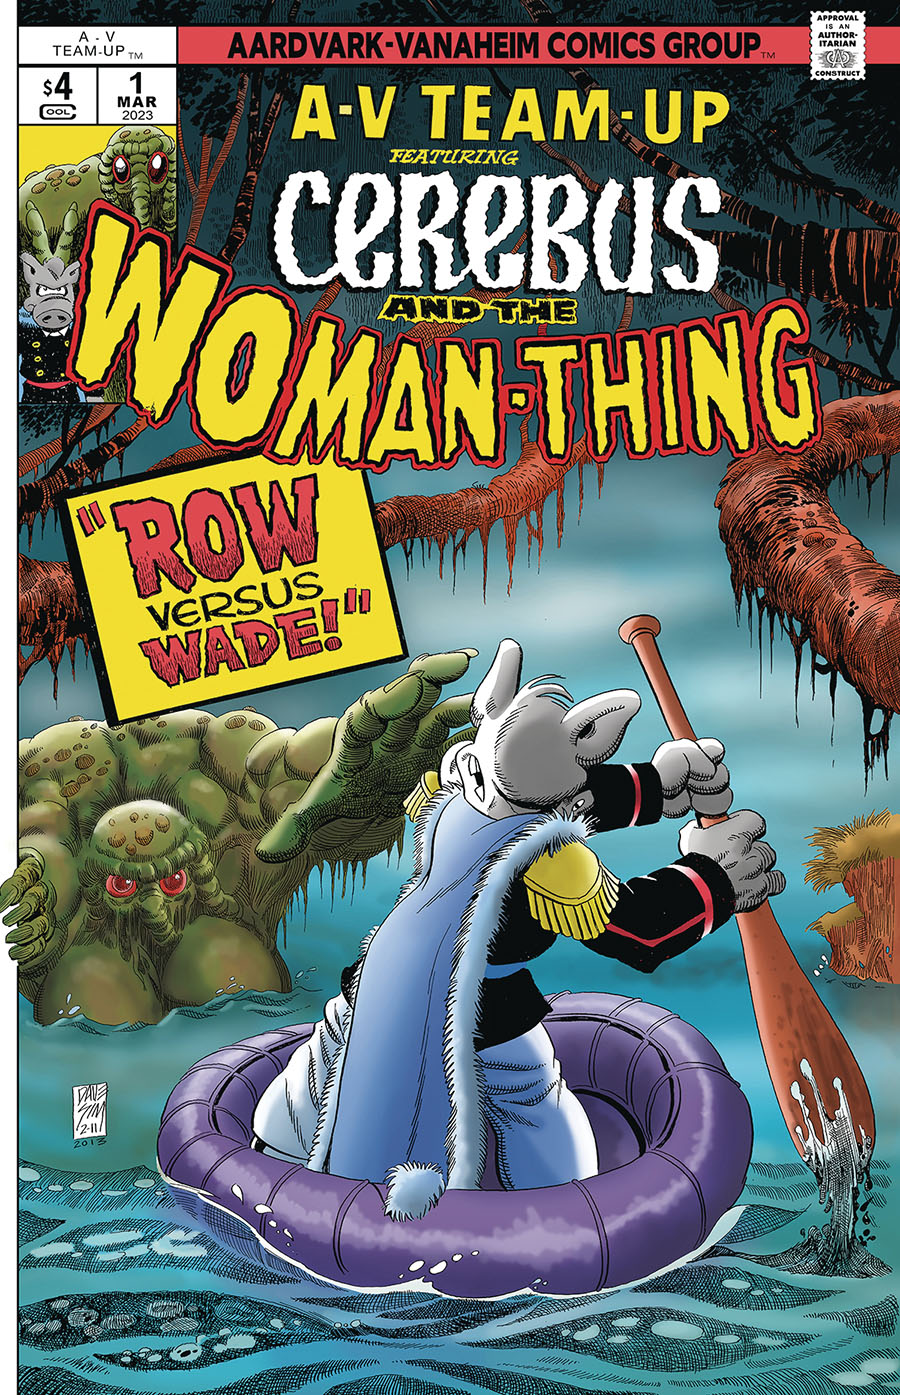 A-V Team-Up Cerebus And The Woman Thing #1 (One Shot) Cover A Regular Edition